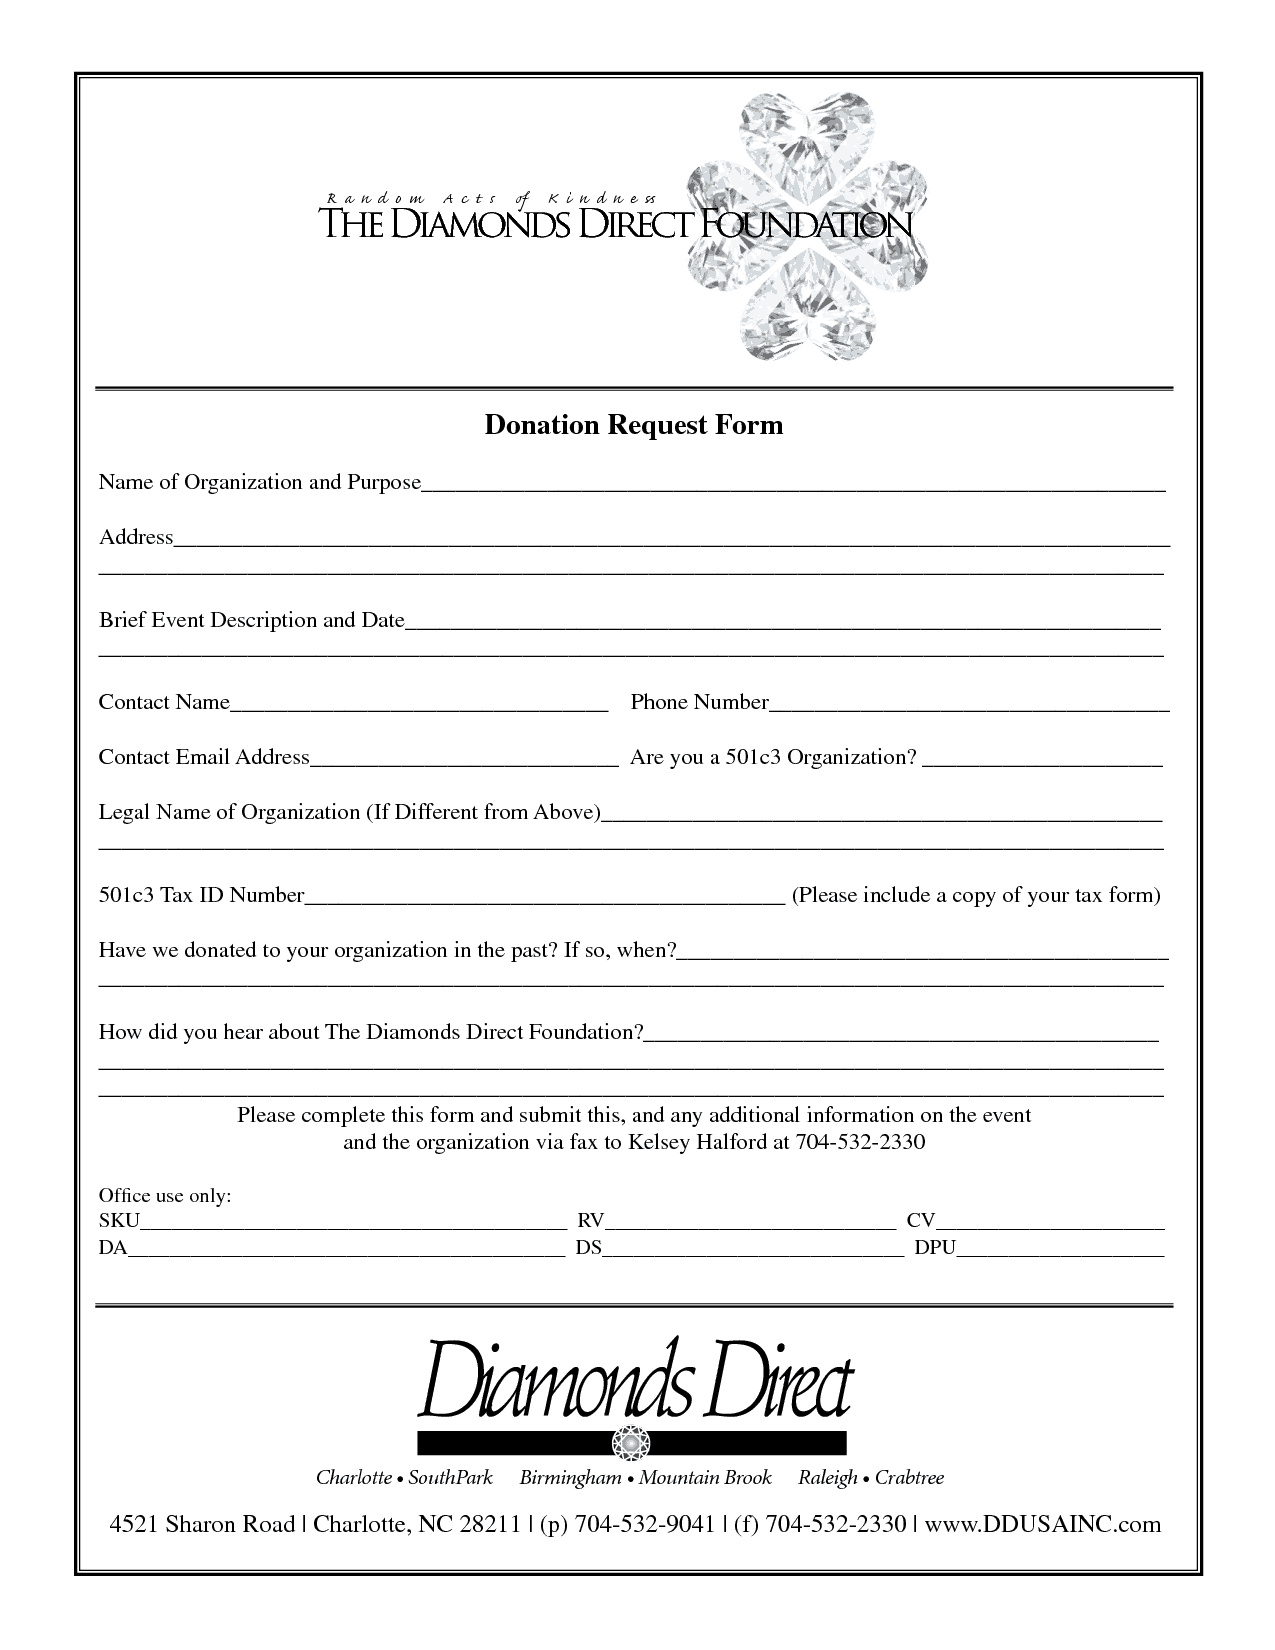 donation form example 26.41